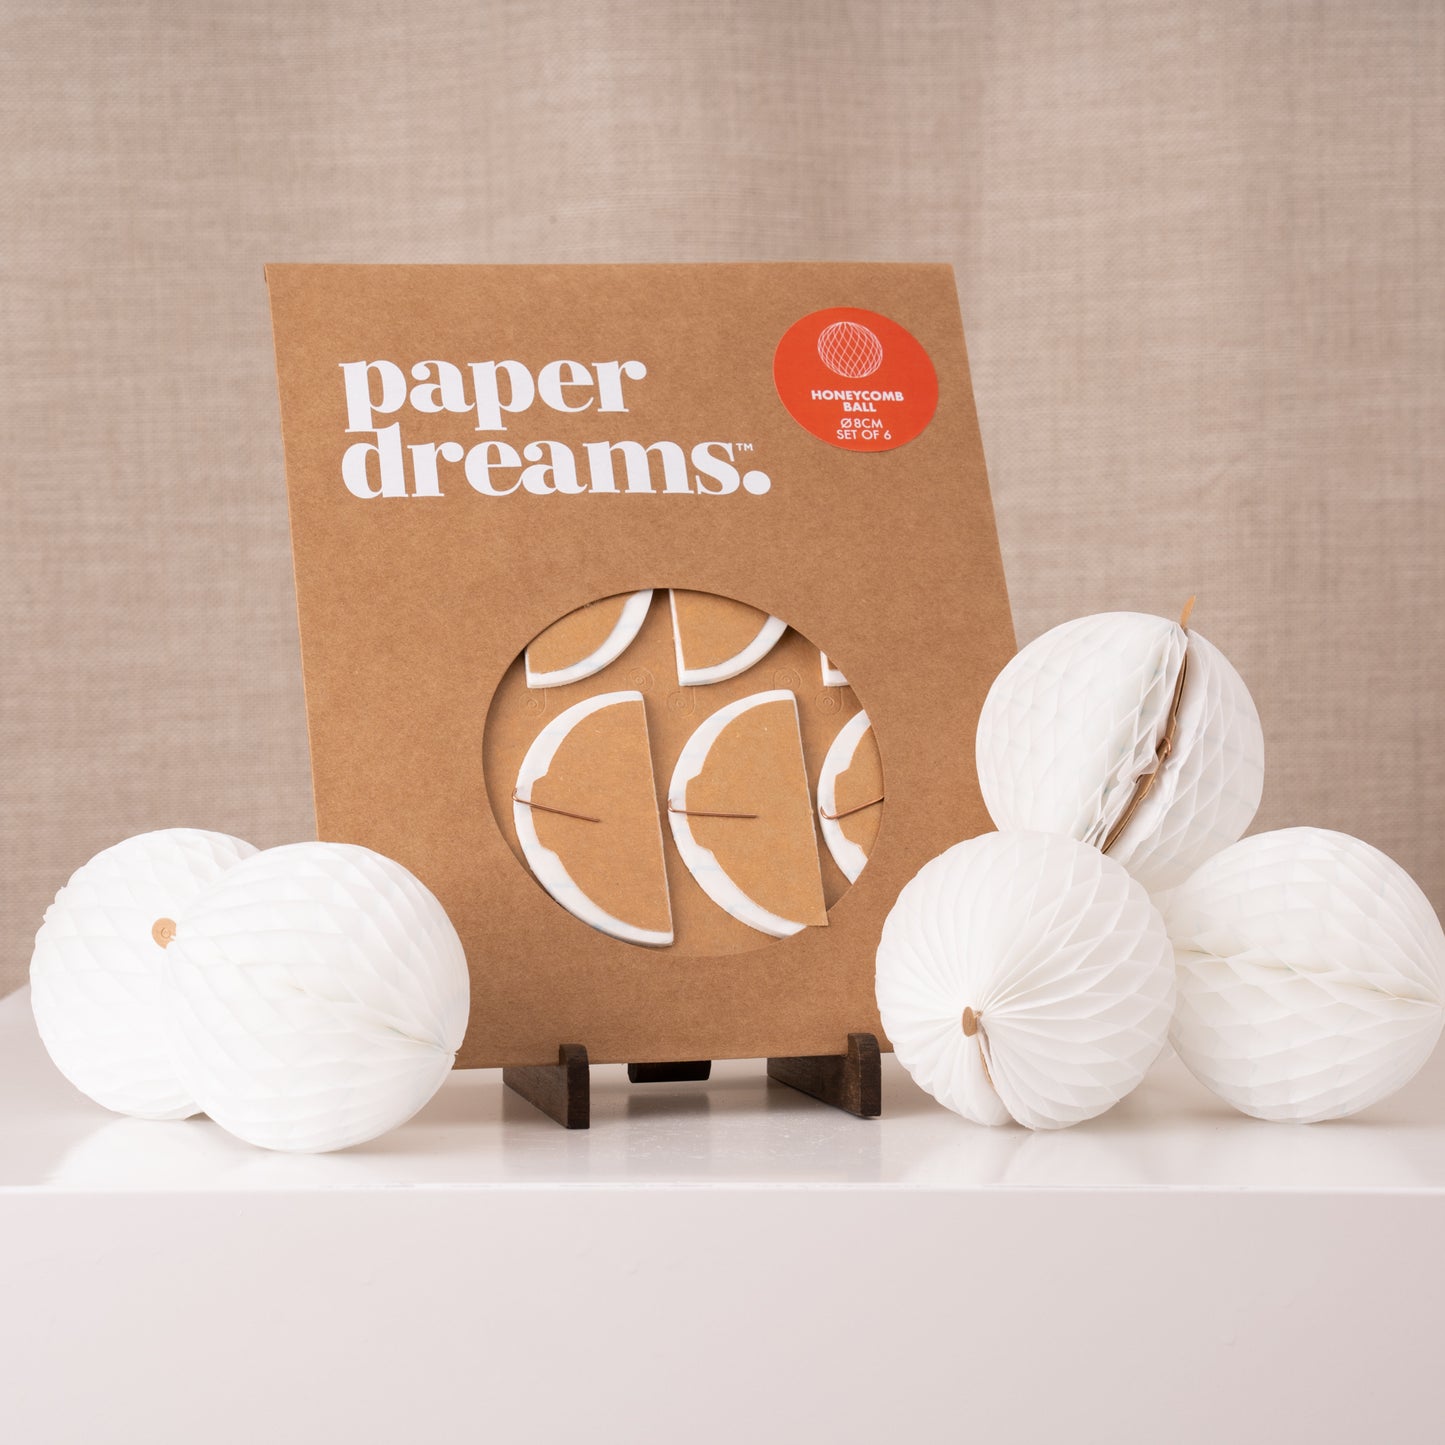 Paper Dreams Honeycomb Ball set of 6 Plastic Free Decorations White